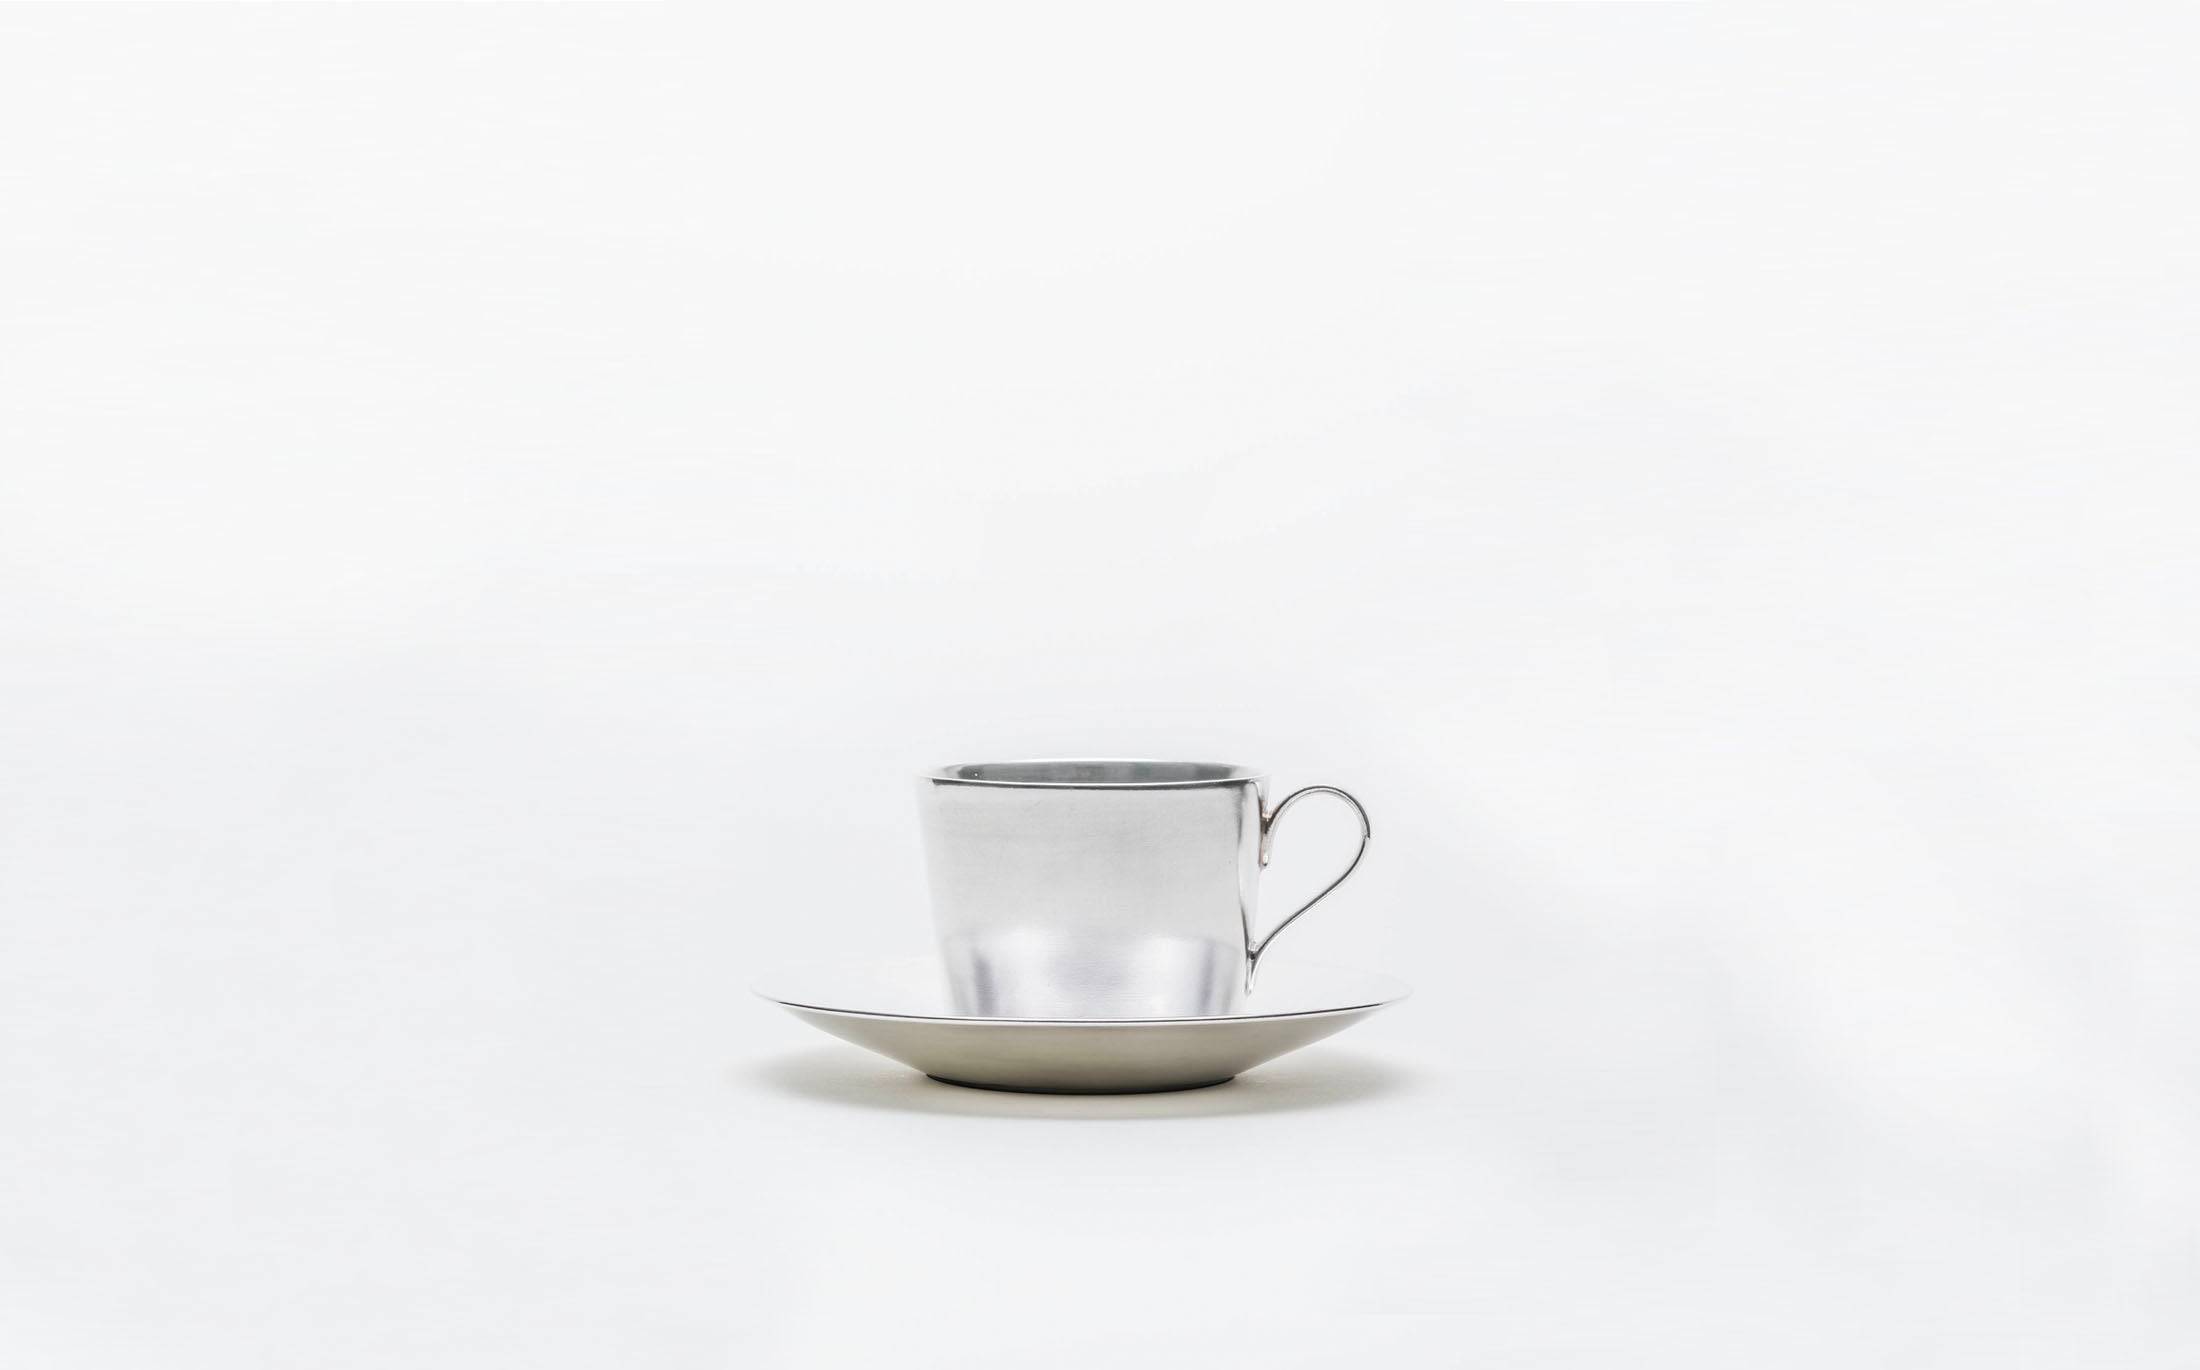 Shirotae - Silvered Porcelain - Coffee Cup and Saucer